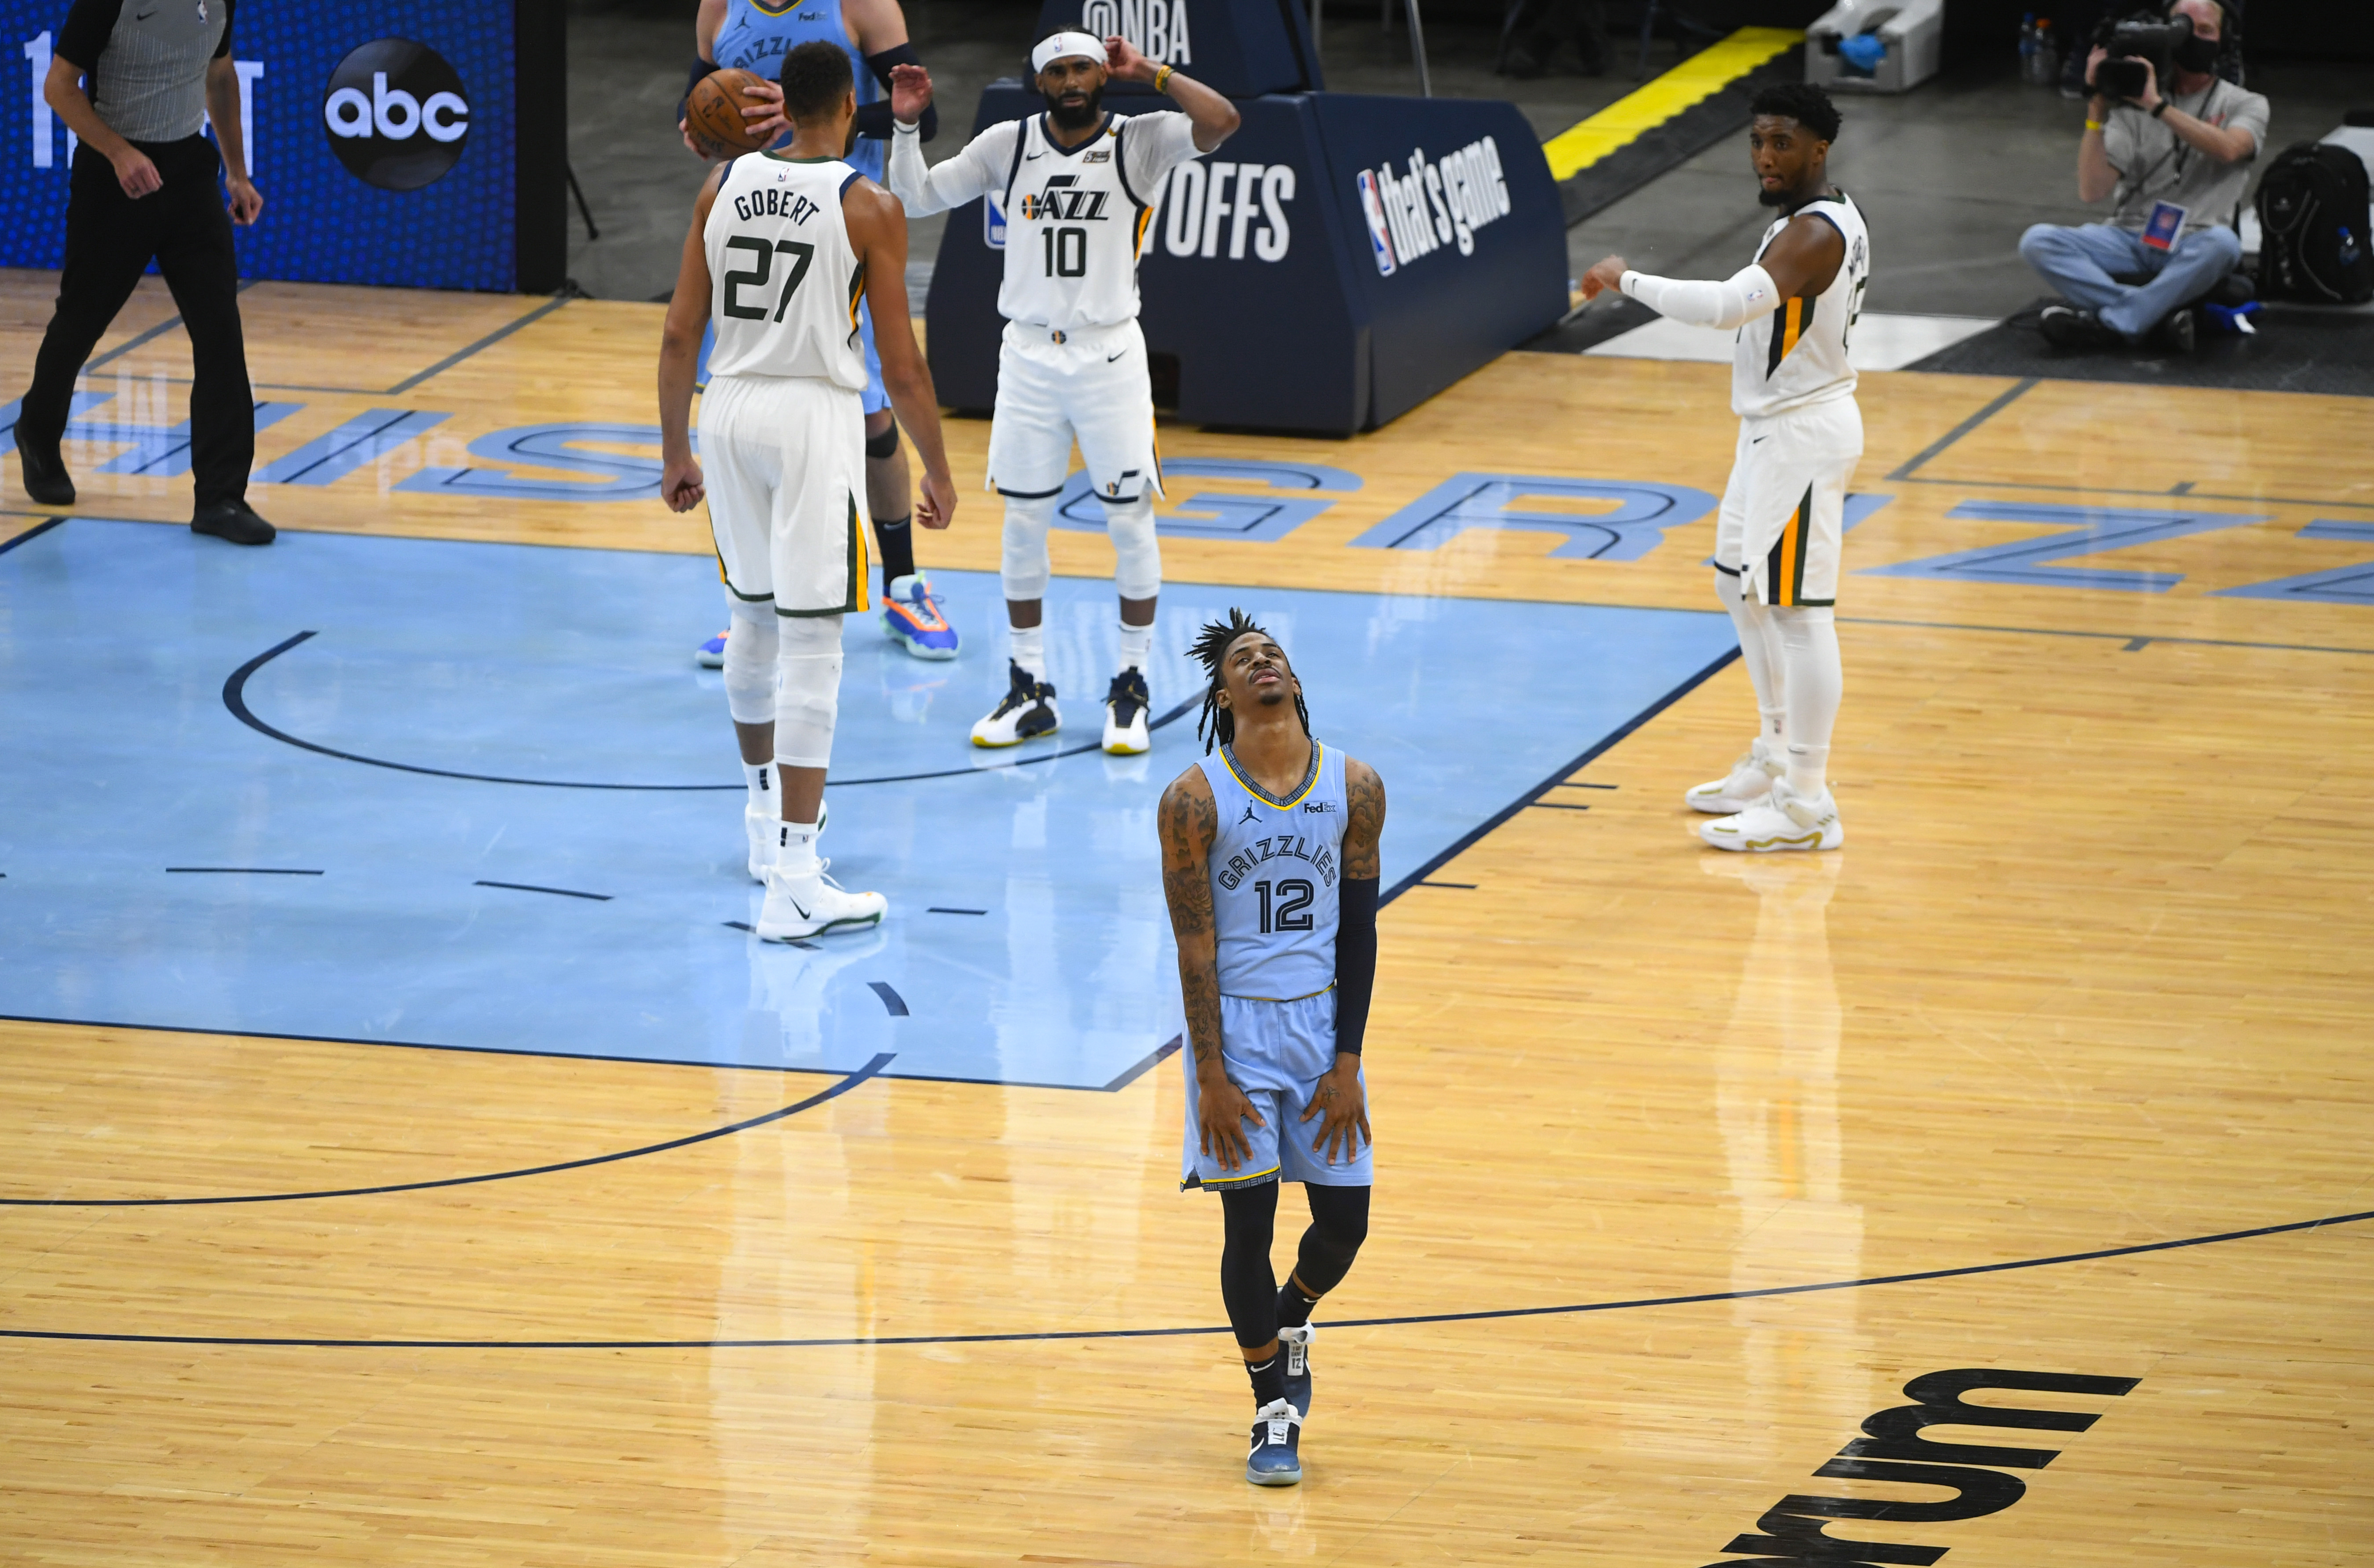 Fallout continues over racist insults hurled at Ja Morant's family as Jazz  and Grizzlies head towards Game 3